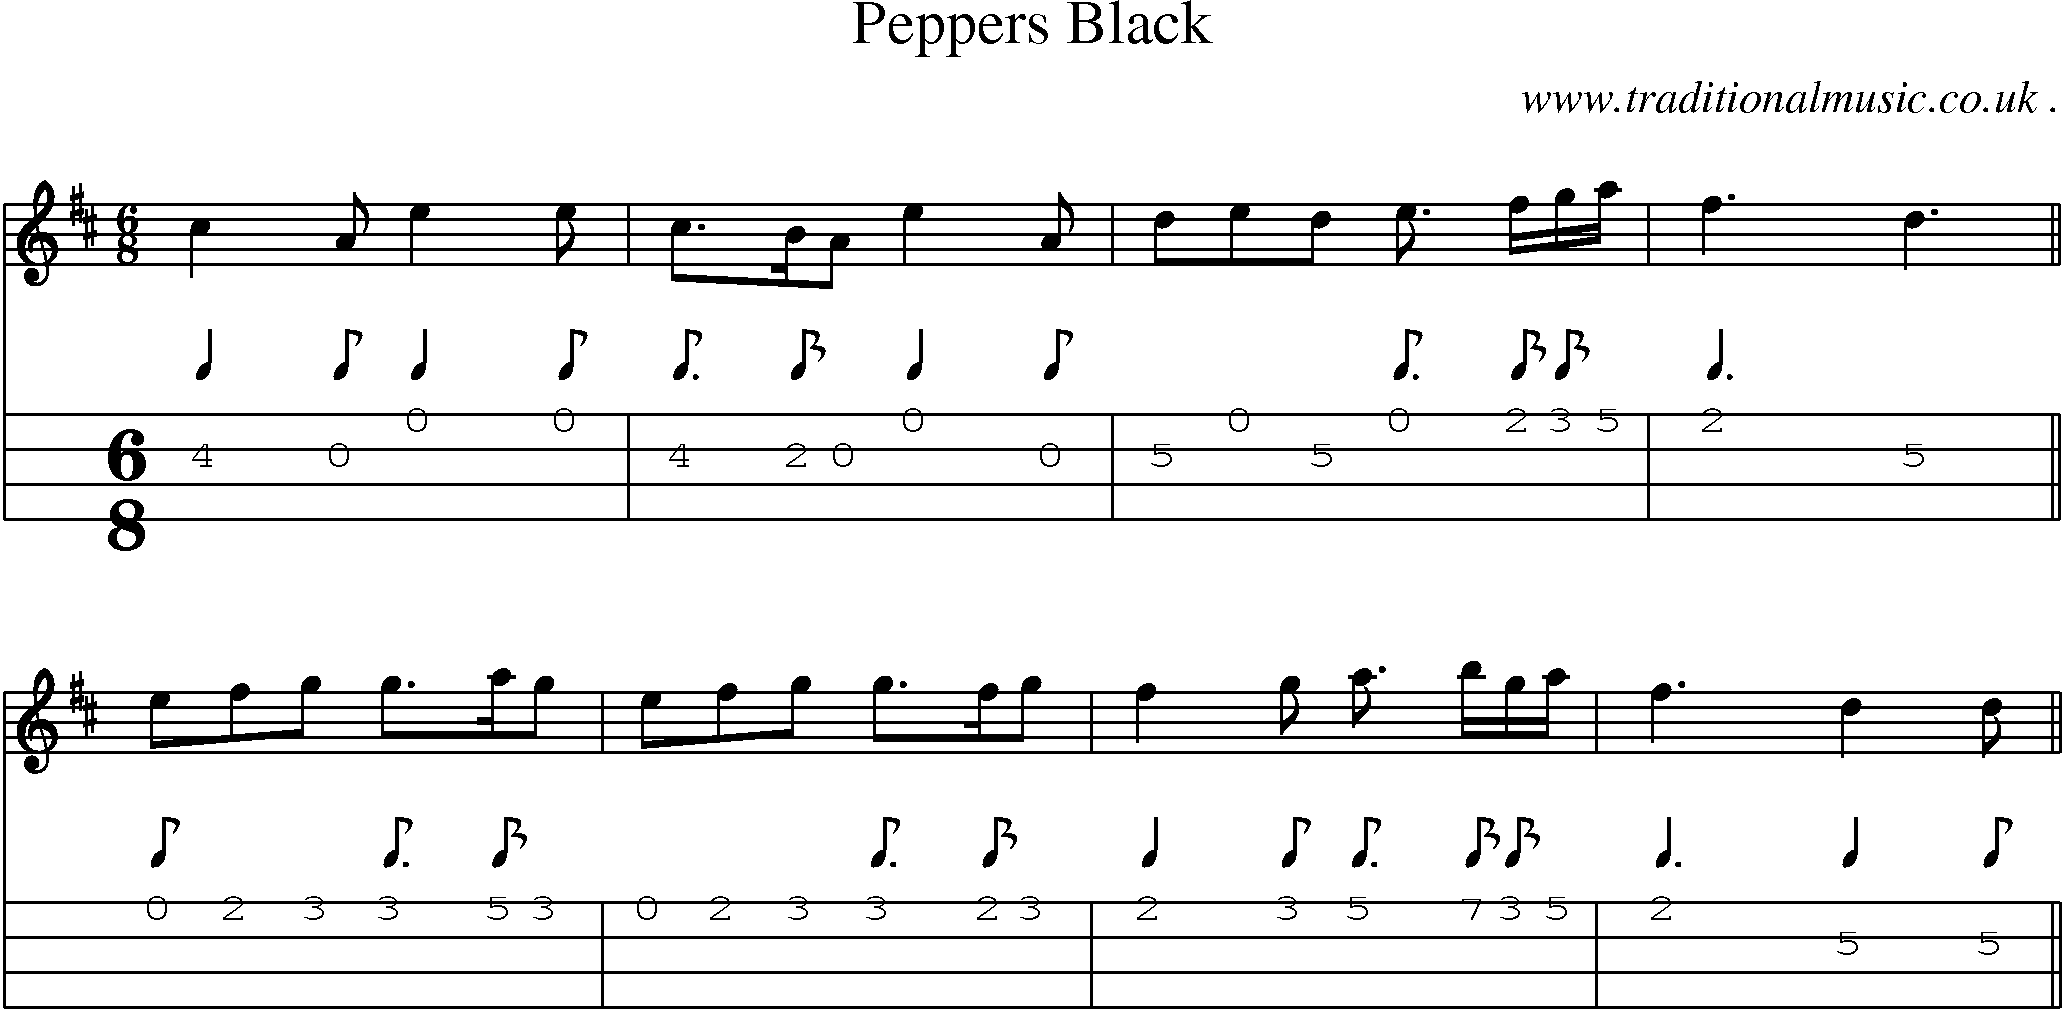 Sheet-music  score, Chords and Mandolin Tabs for Peppers Black